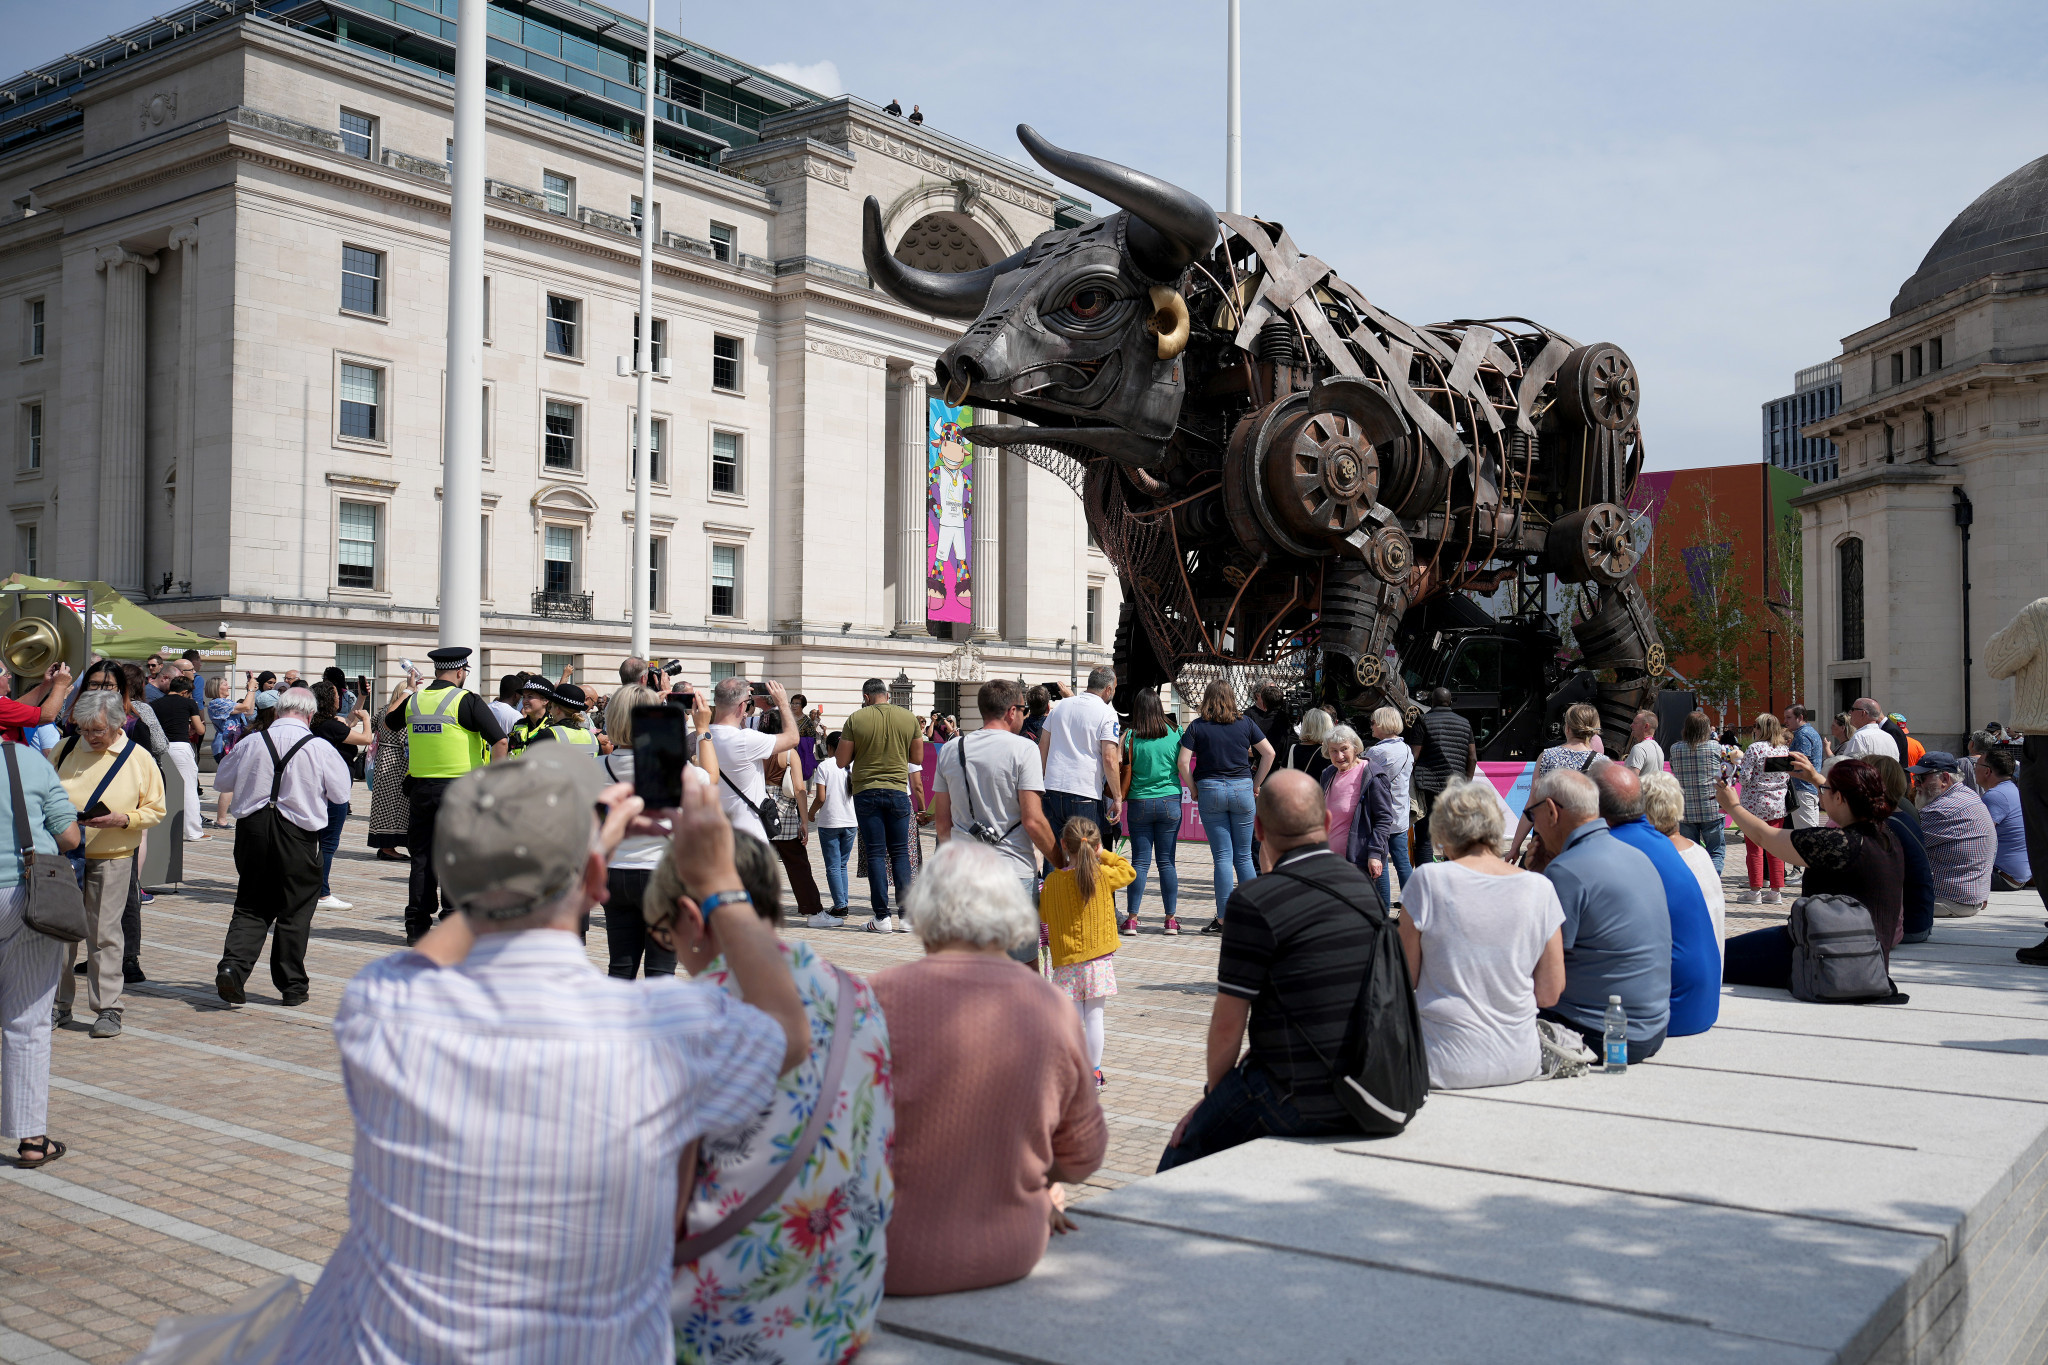 The raging bull has proved a big attraction at Centenary Square during the Birmingham 2022 Commonwealth Games ©Getty Images